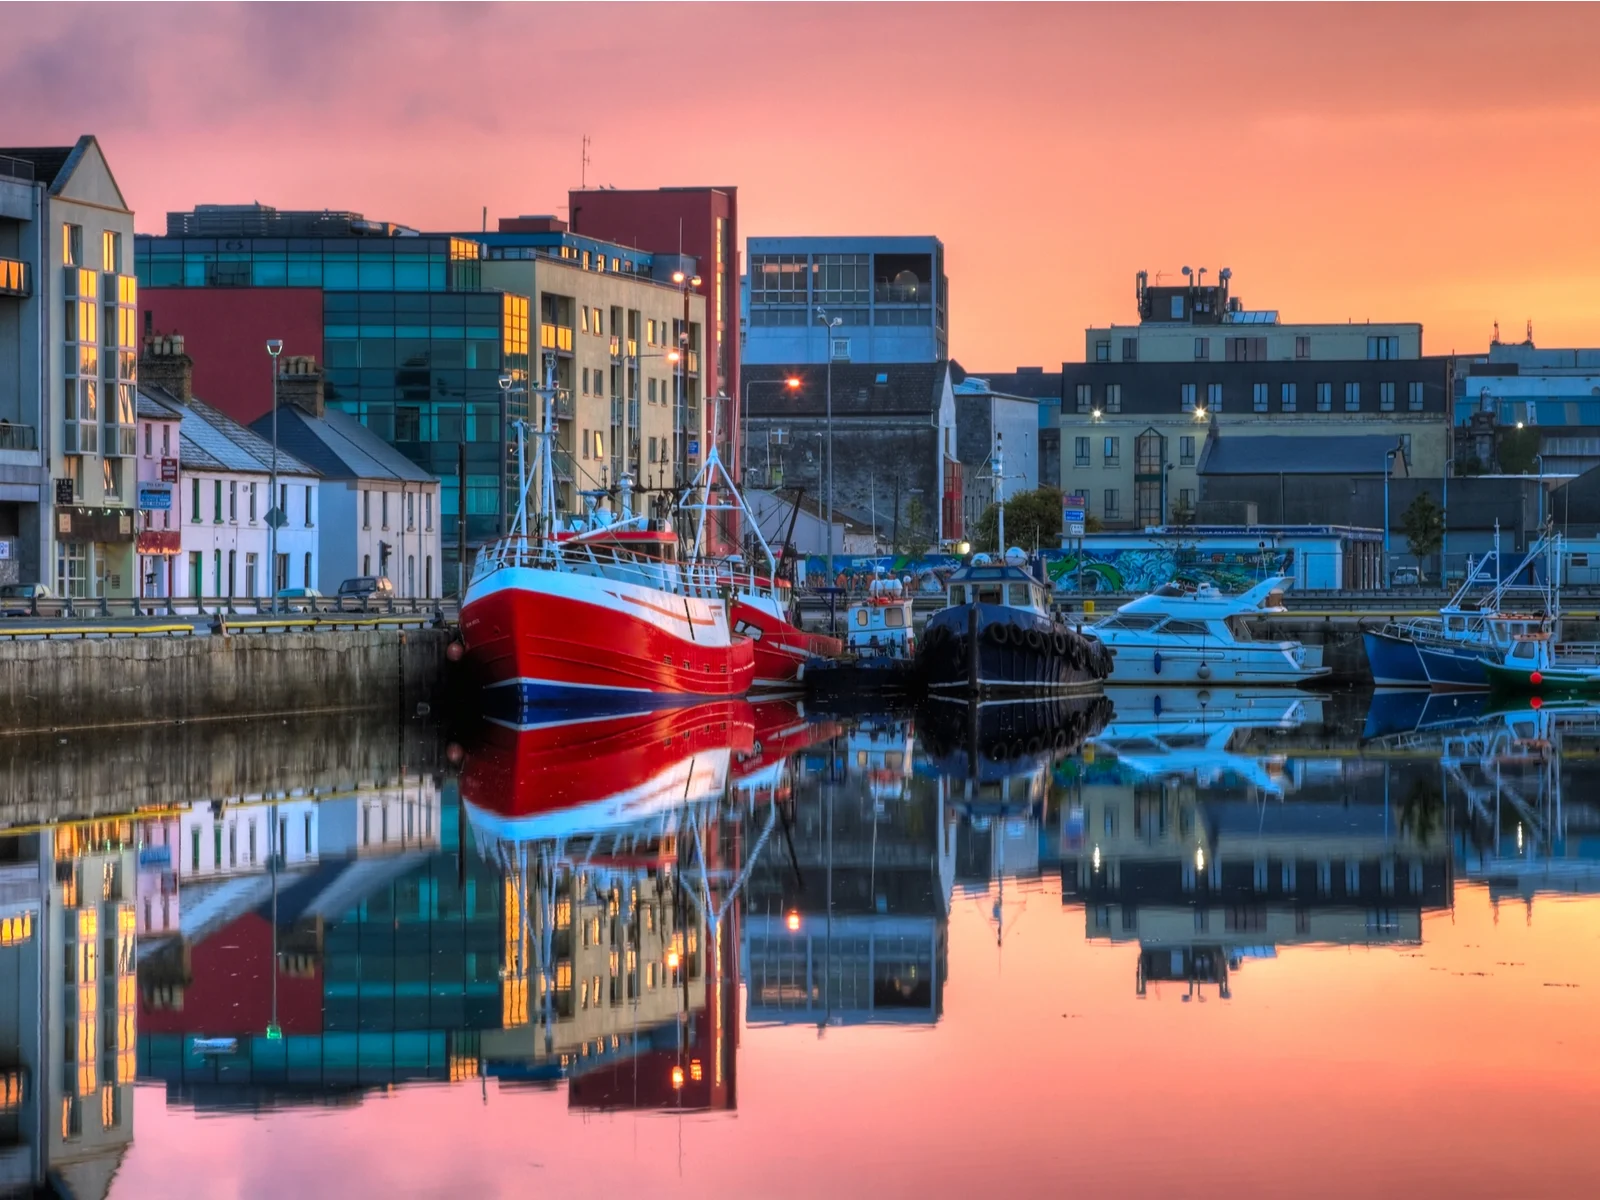 Young sunrise over the Galway Dock with fishing boats reflected on the mirror-like still water, a piece on the best places to visit in Ireland